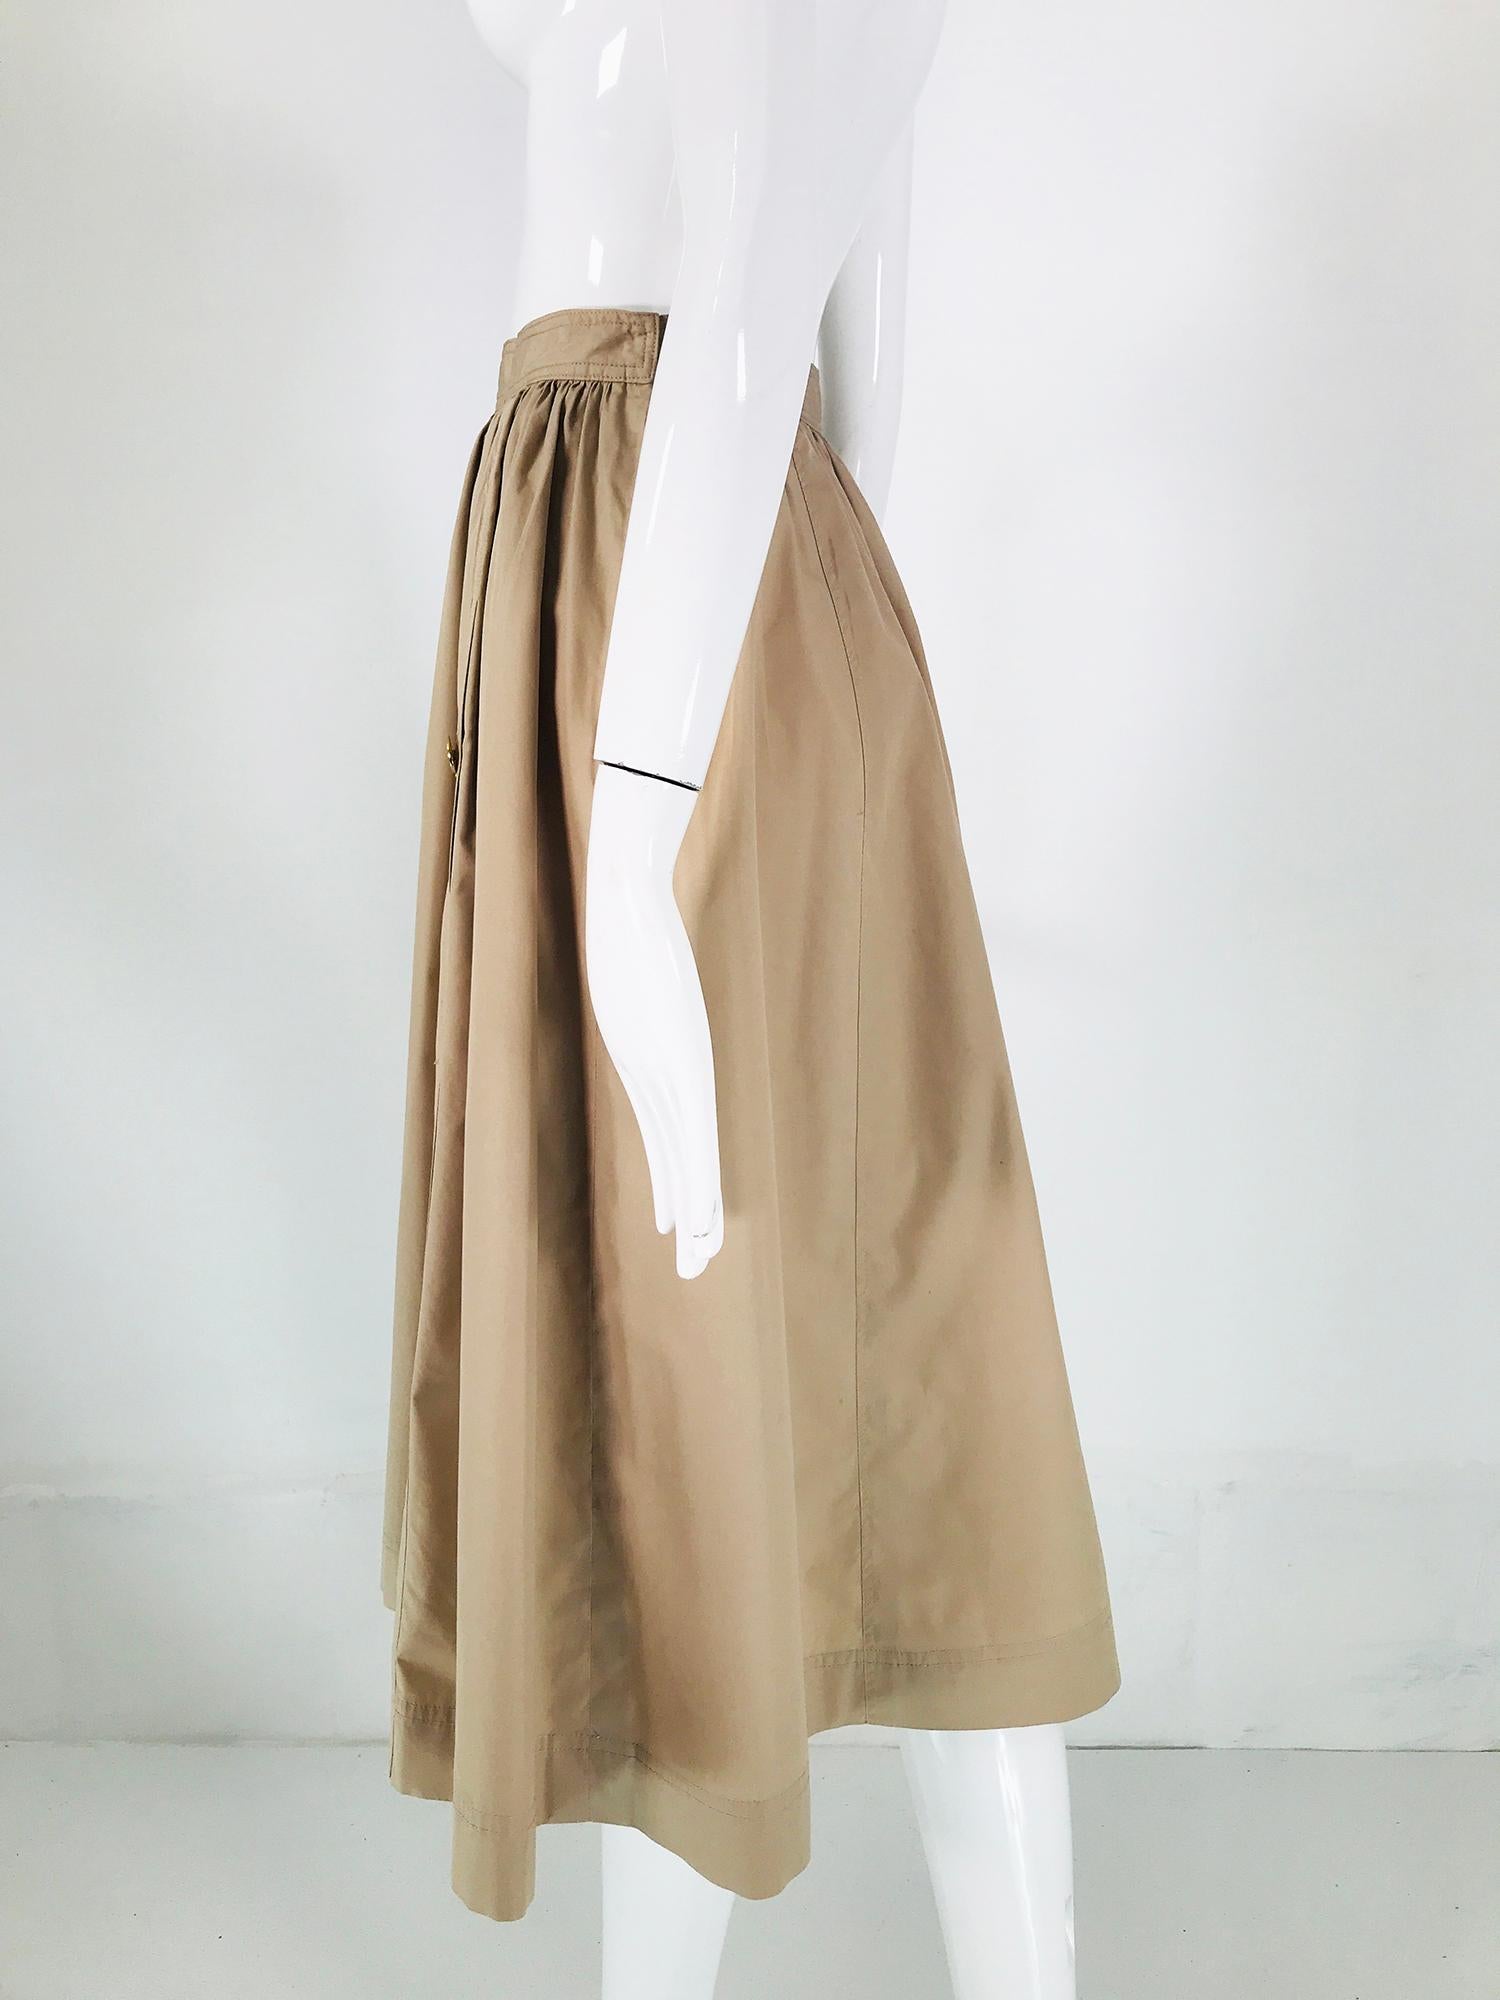 Women's Vintage Chanel Tan Poplin Gathered Skirt with Button Pockets